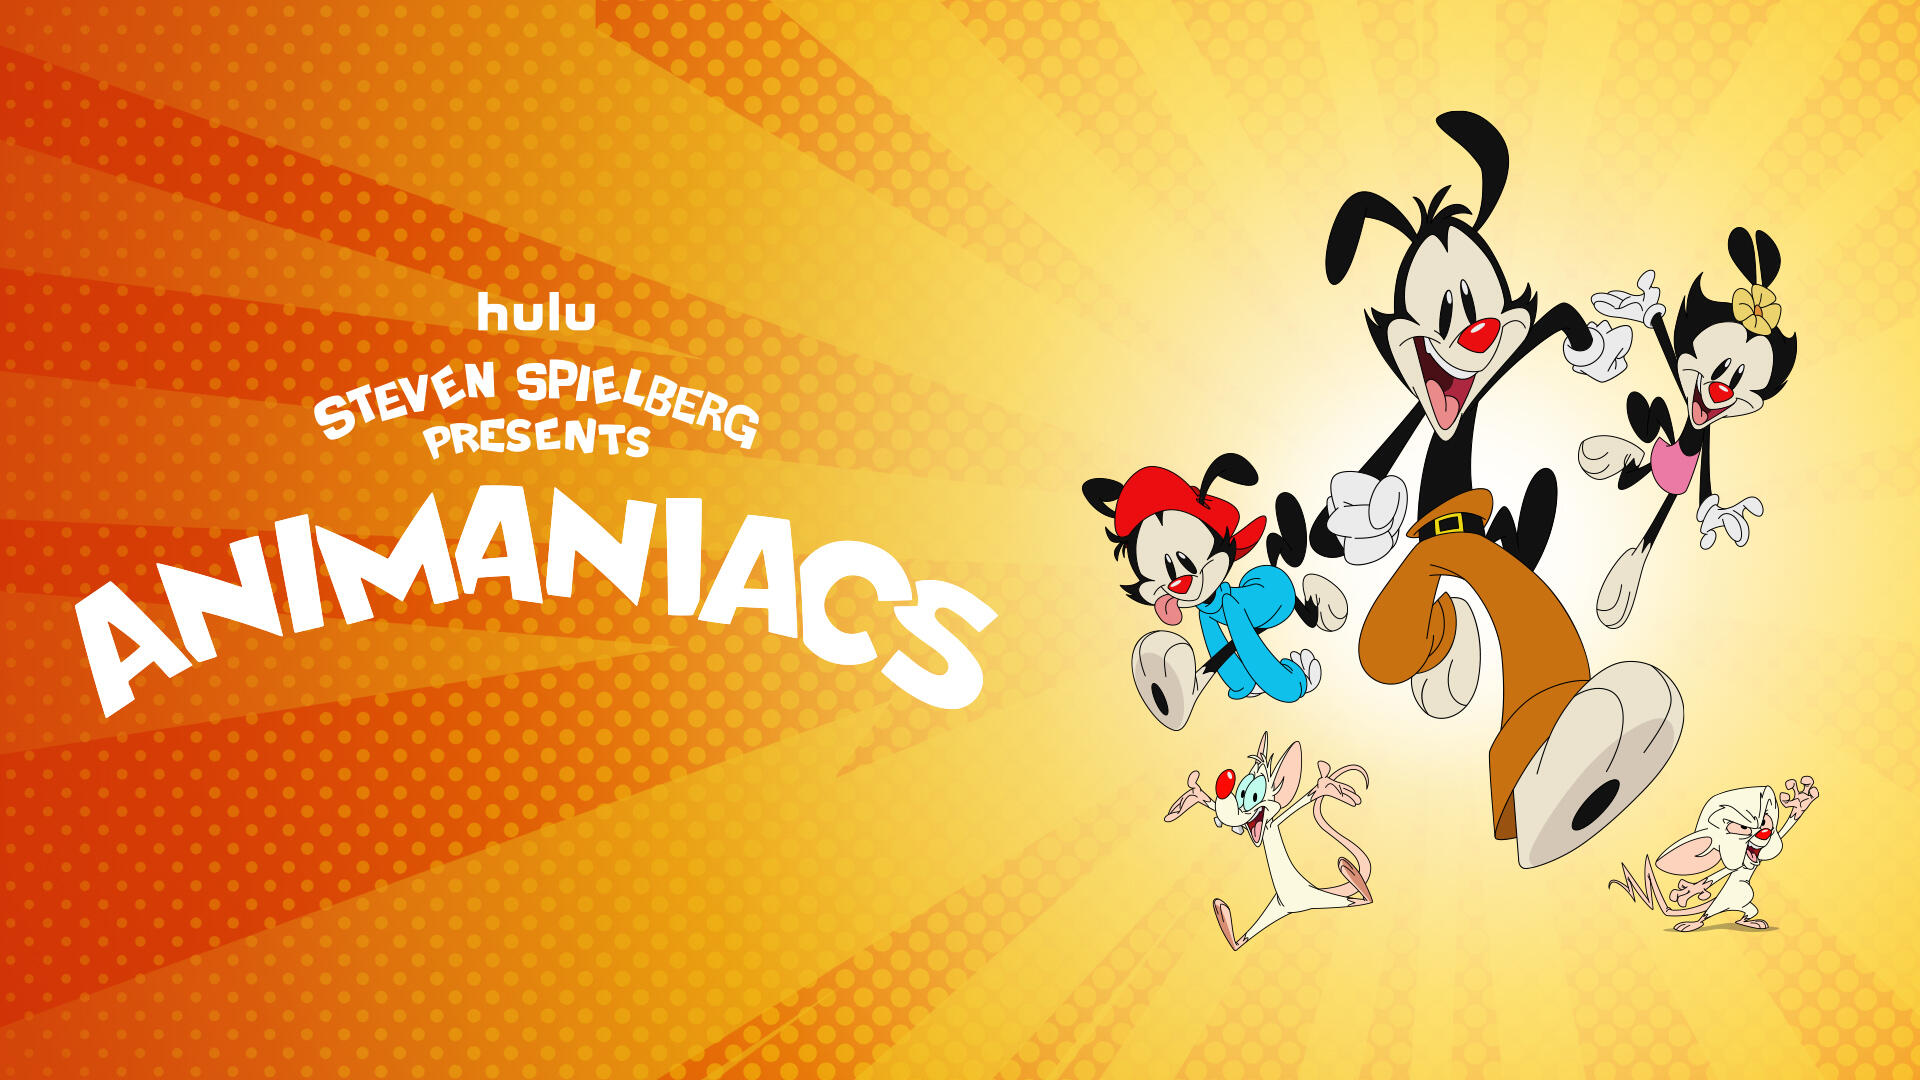 Animaniacs -- They’re back again-y! Hulu, Amblin Television and Warner Bros. Animation join forces again to continue the legacy of the iconic, family friendly animated series. Following a successful first season and practically blowing up the internet as one of Hulu’s all-time most talked about series across social media, “Animaniacs” returns for a second zany season with all 13 episodes launching on Friday, November 5. Yakko, Wakko and Dot return for an all-new season of big laughs and the occasional epic takedown of authority figures in serious need of an ego check. Season two of the Emmy® award-winning series is packed with enough comedy sketches, pop culture parodies, musical comedy, and self-referential antics to fill a water tower. Meanwhile, join season 1 favorites Starbox & Cindy for their latest play date while Pinky and the Brain’s ideas for world domination lead them to a dictator dinner party, a beauty pageant and even the International Space Station. (Courtesy of Amblin Television/Warner Bros. Animation)